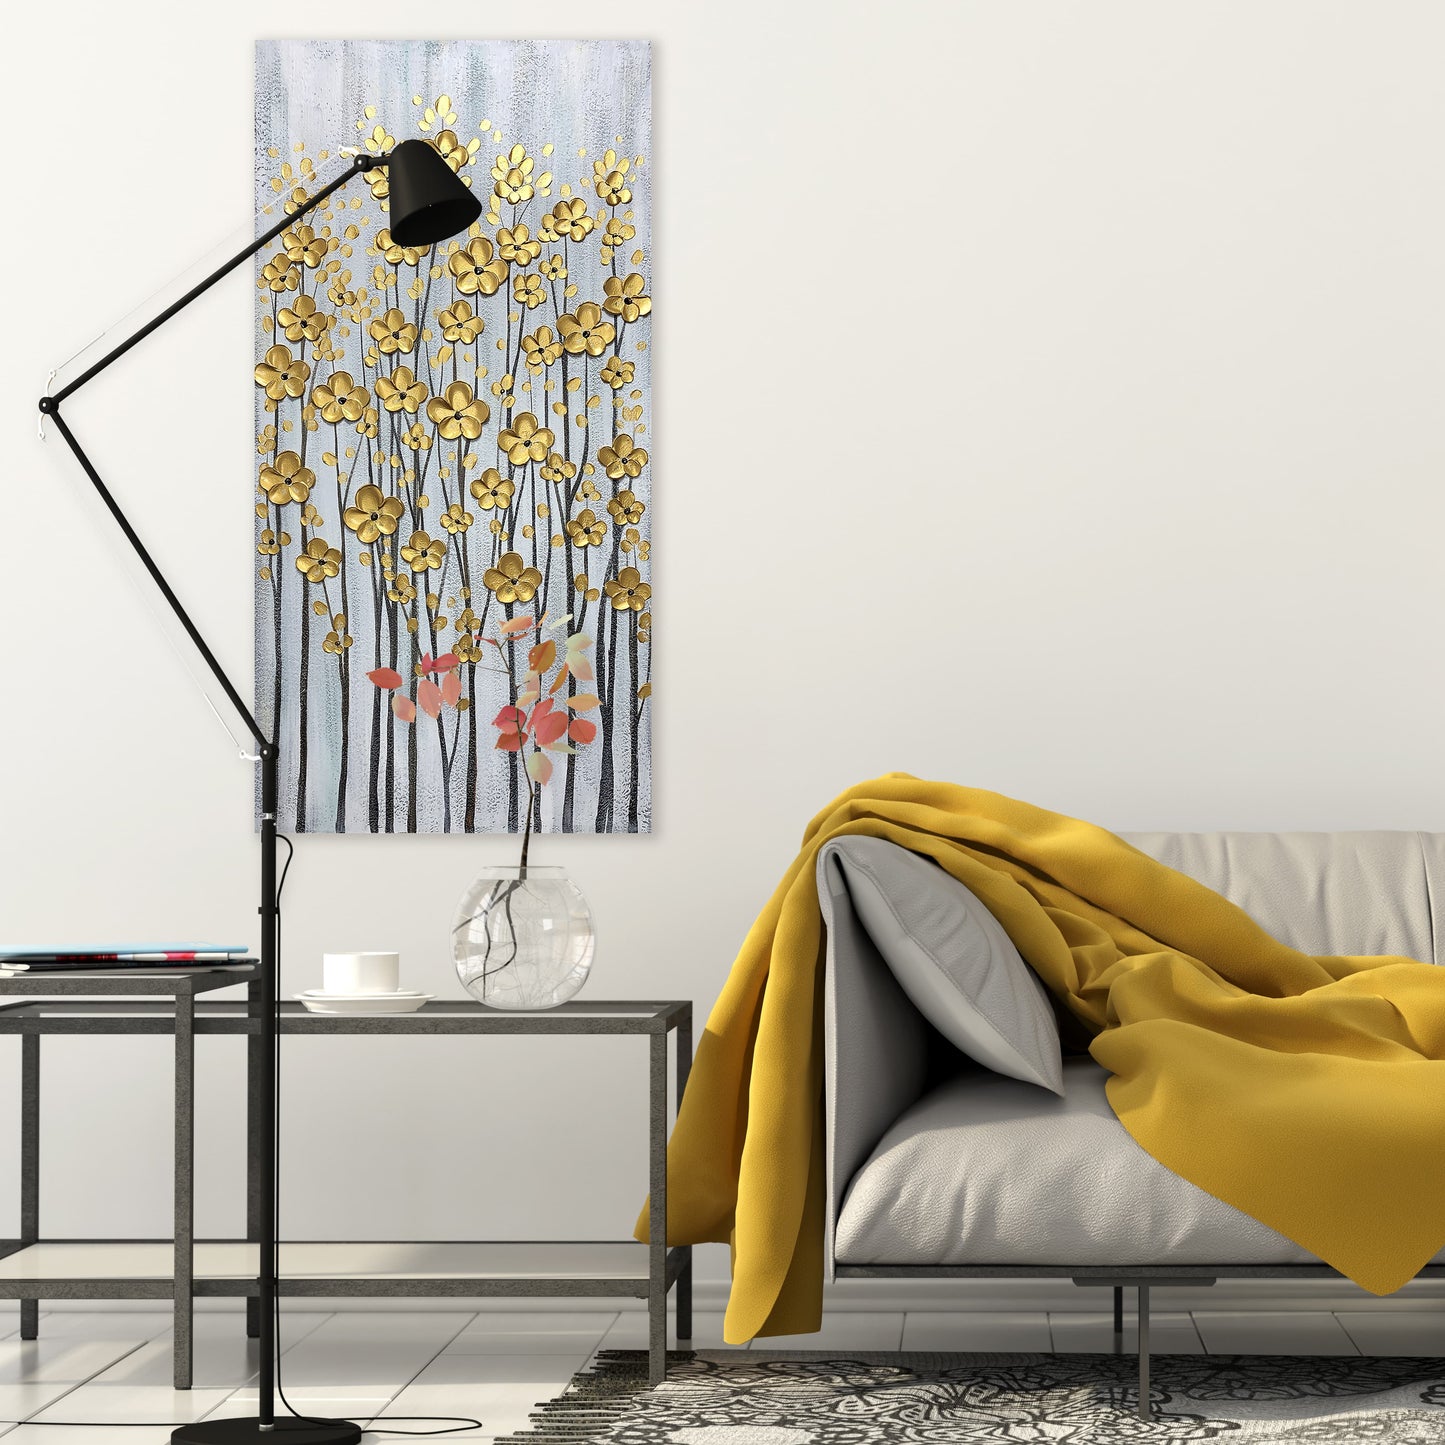 Abstract Art "Aureate Blooms" Hand-painted on Wrapped Canvas for Home Decor